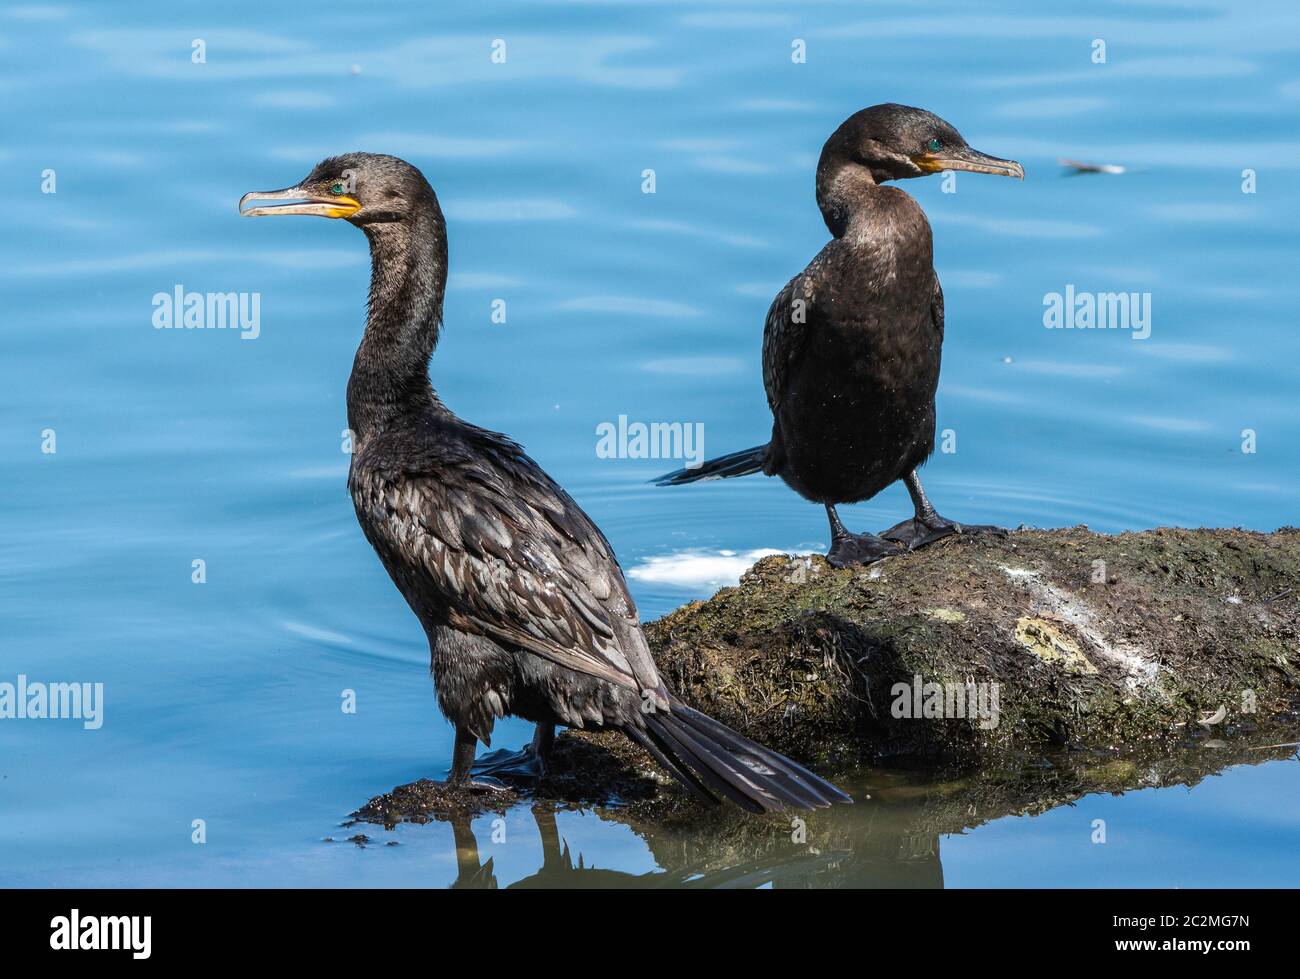 Two Neotropic Cormorants, Phalacrocorax brasilianus, stand on the shore of a small lake in the Riparian Preserve at Water Ranch, Gilbert, Arizona Stock Photo